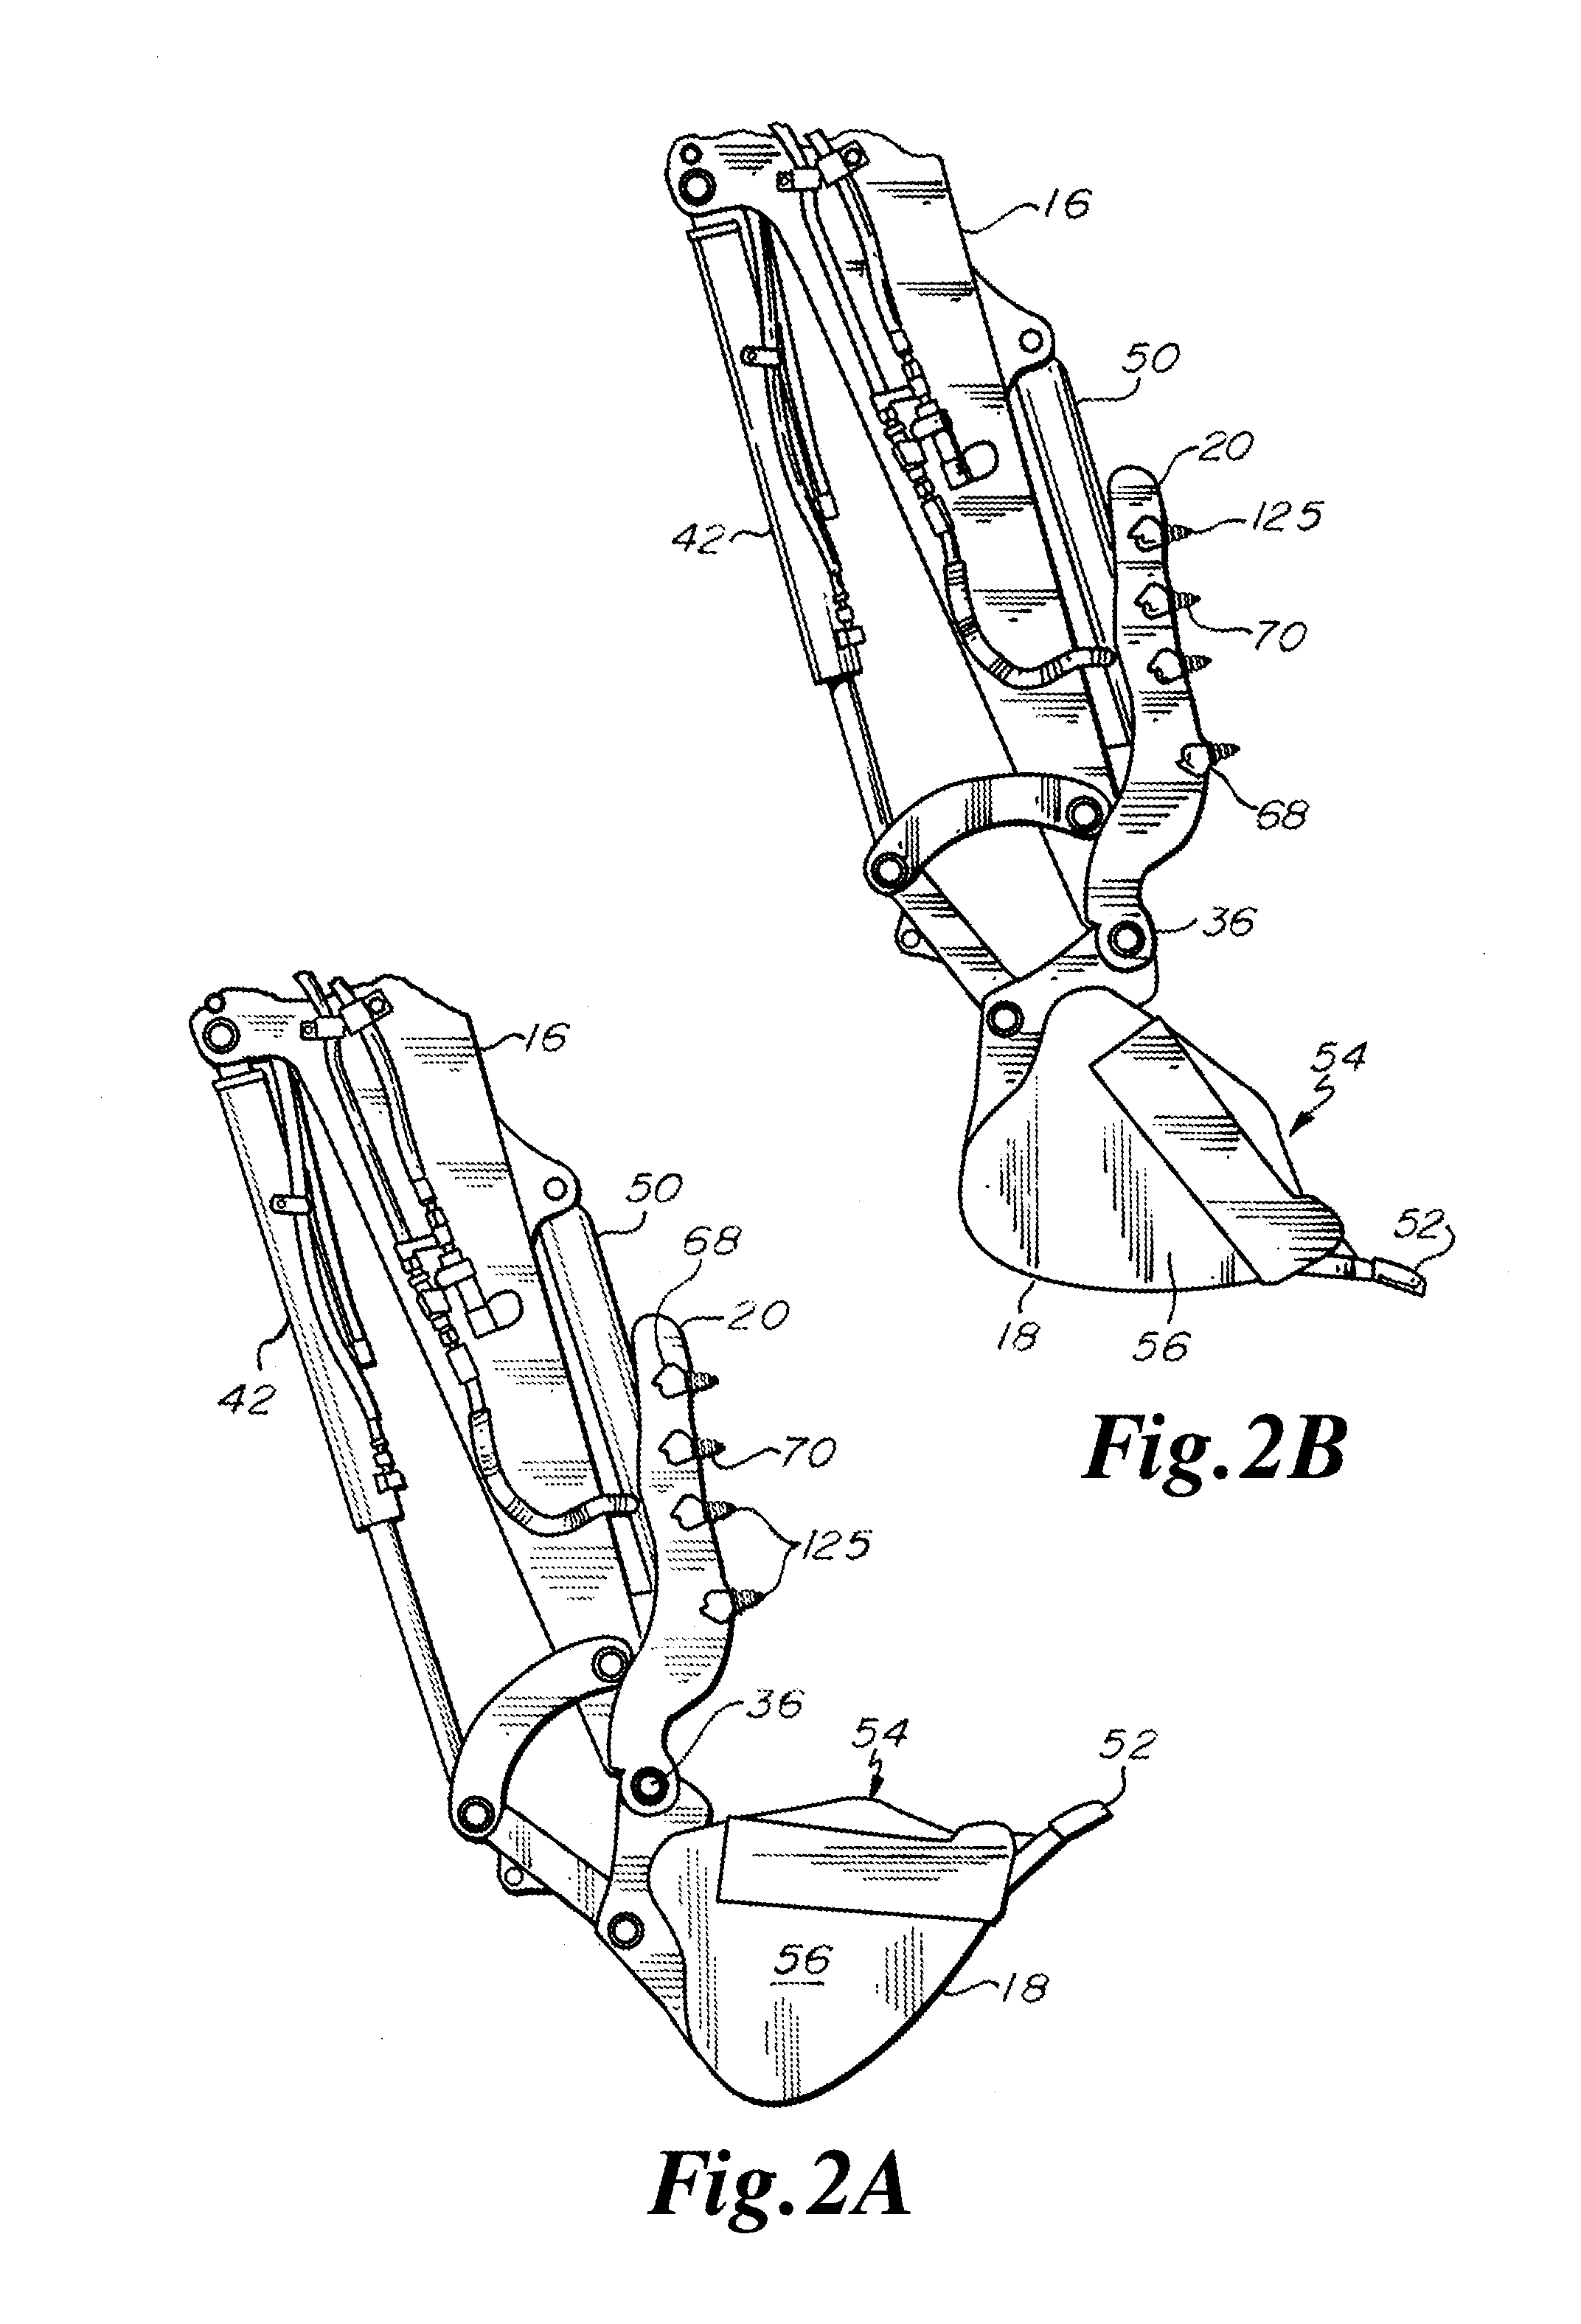 Excavator thumb having hardened removable teeth defining a platform beyond a wear and tear surface of thumb